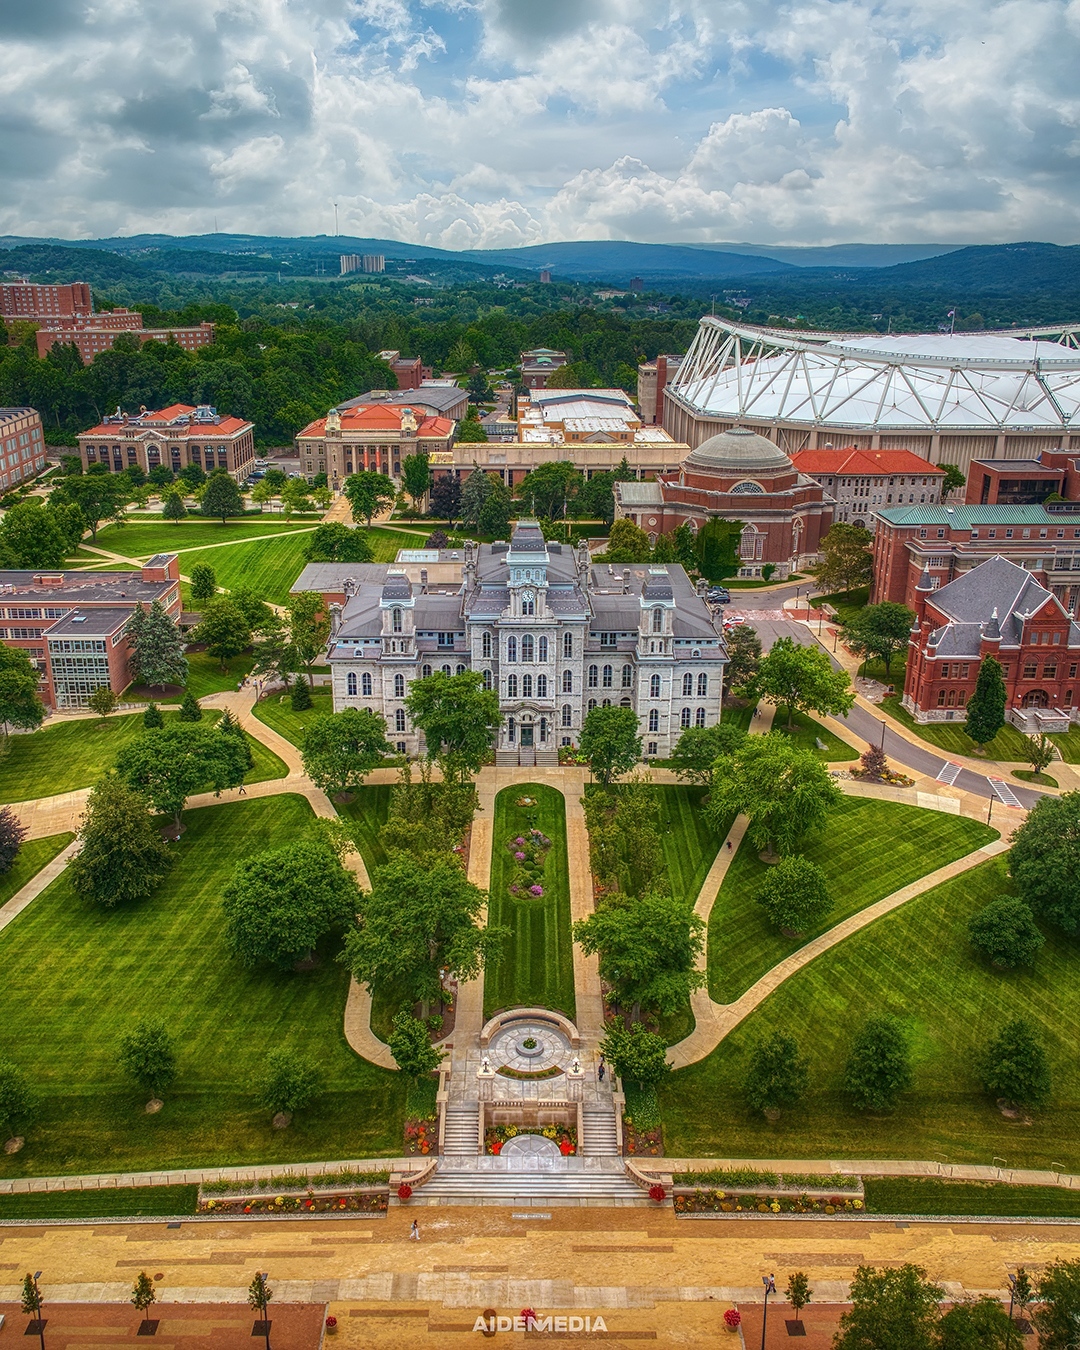 Arial view of campus focusing on the Hall of Languages